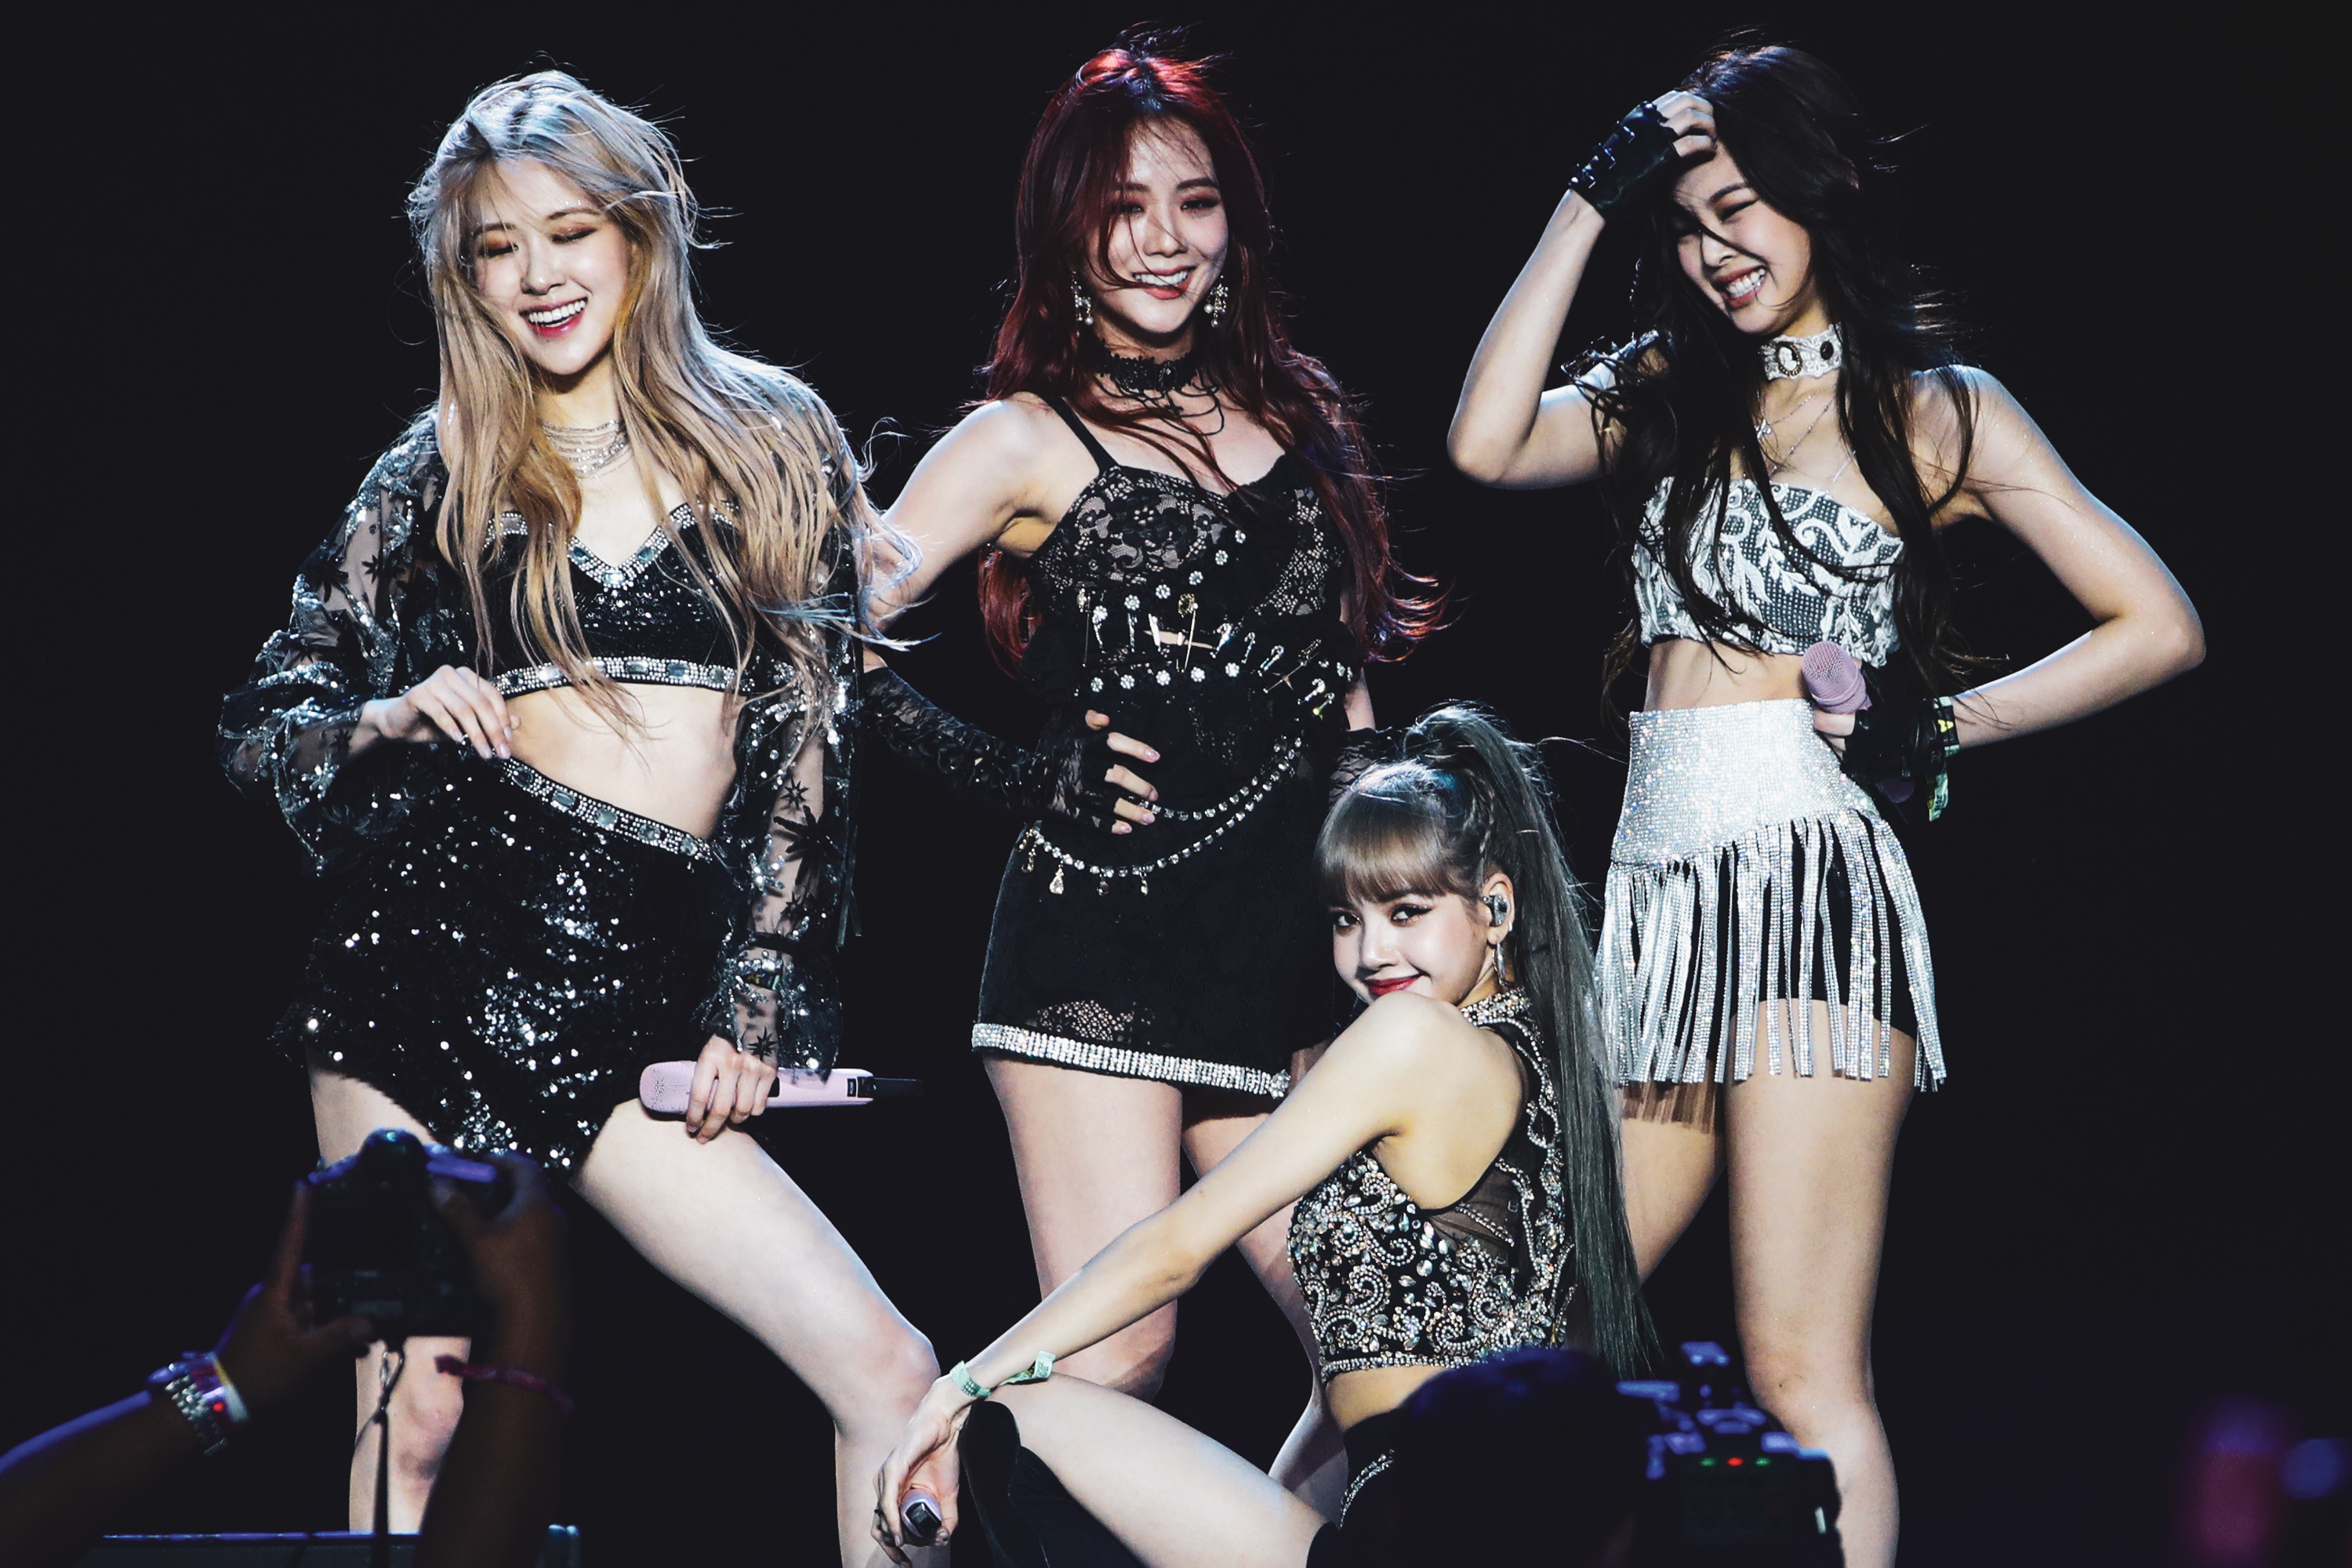 The members of Blackpink perform during 2019 Coachella Valley Music And Arts Festival